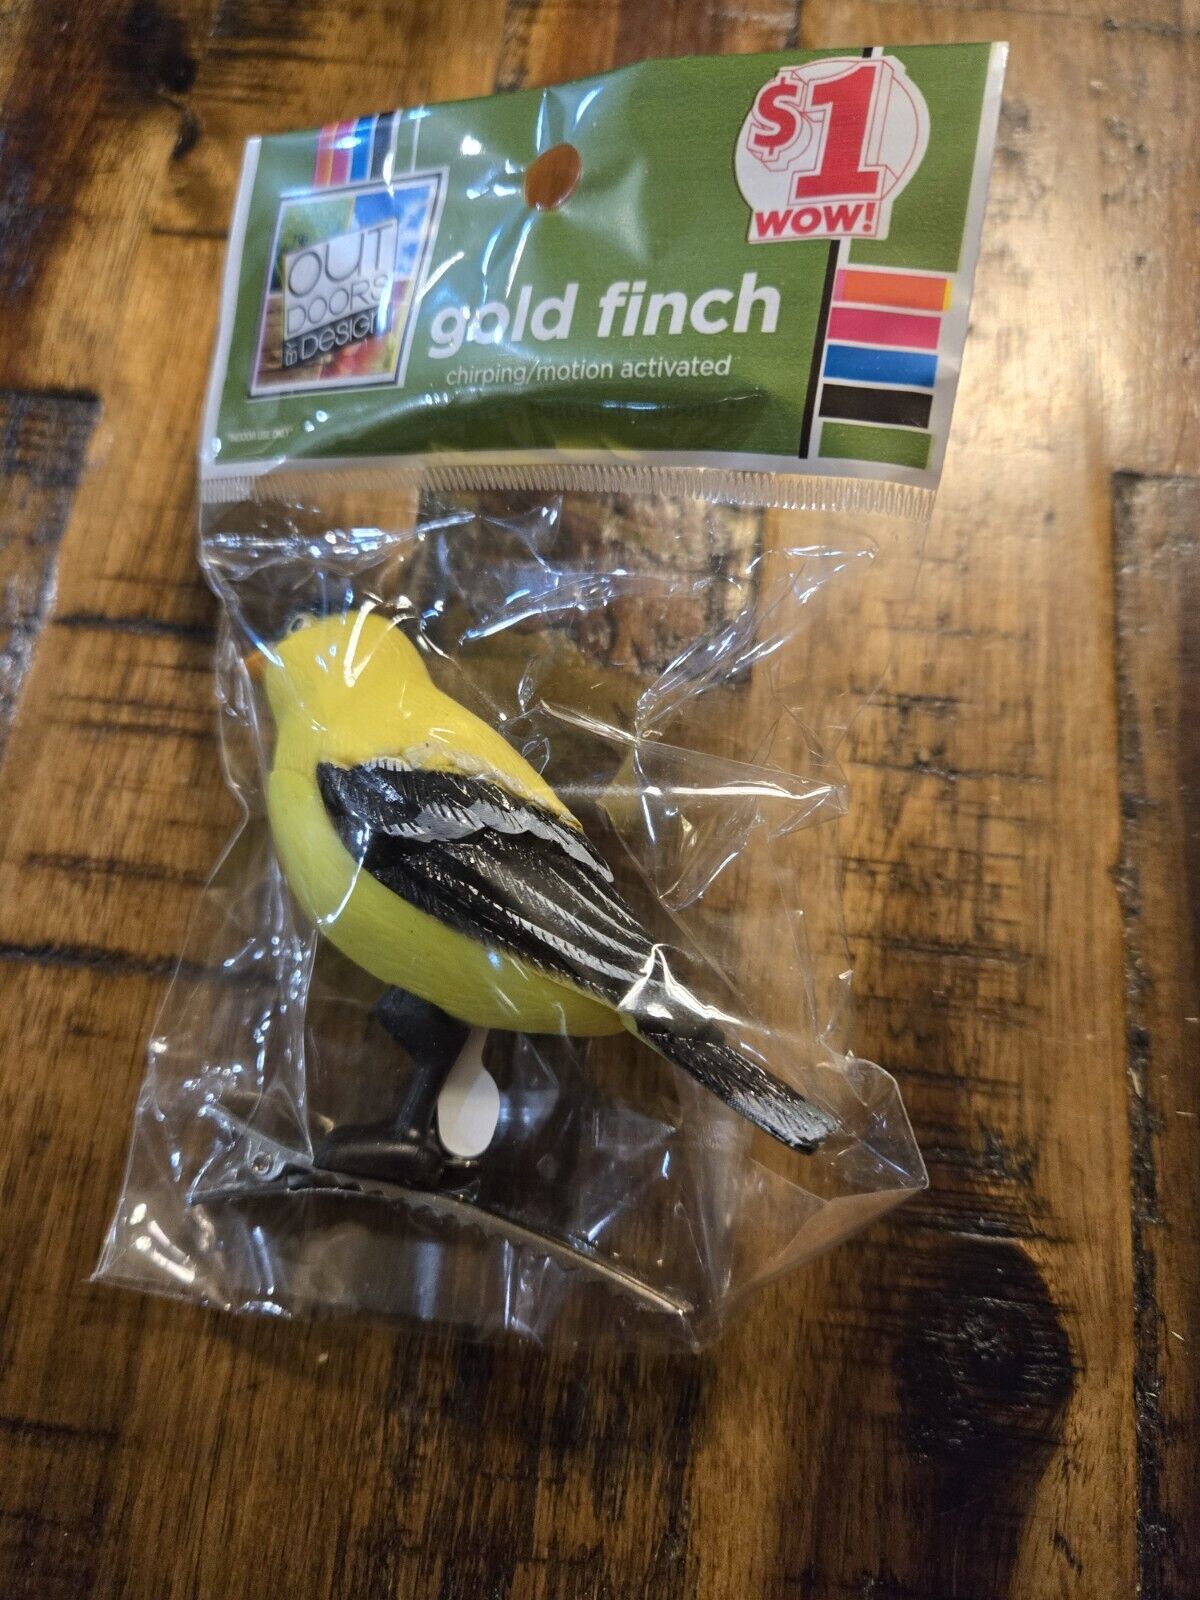 GOLD FINCH MOTION ACTIVATED SENSING CHIRPING CLIP ON BIRD NIP LOT L-21